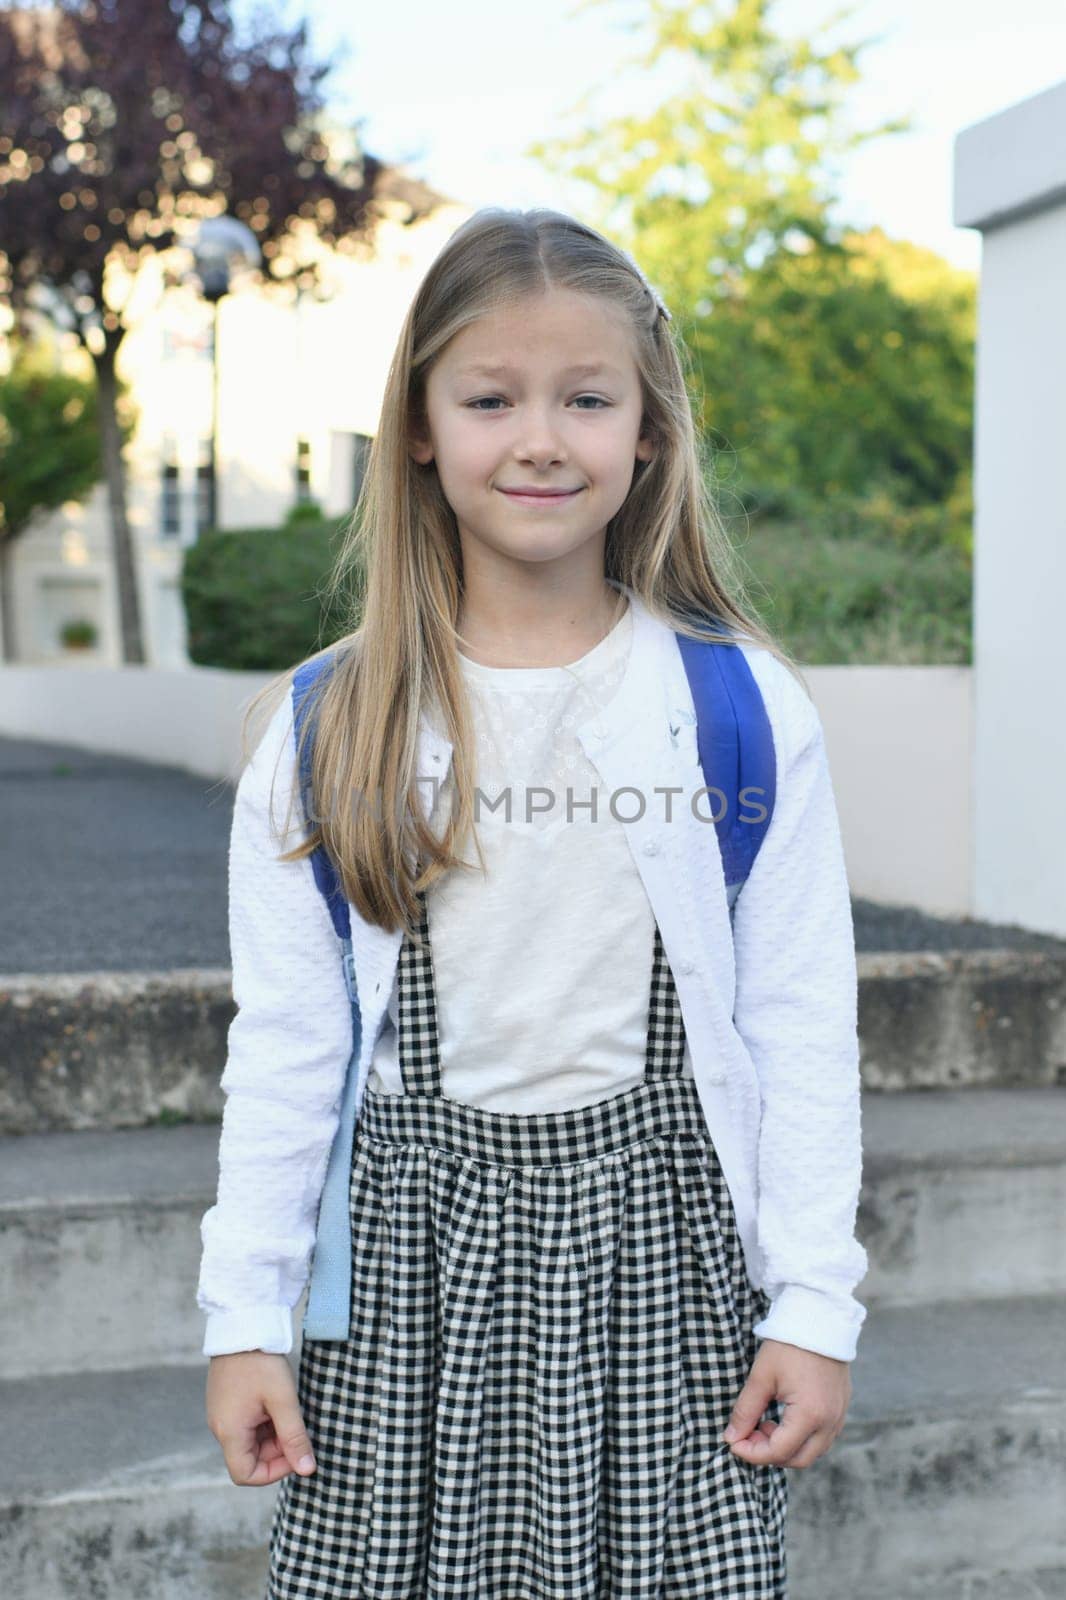 A girl in a school uniform and a backpack returns to school by Godi